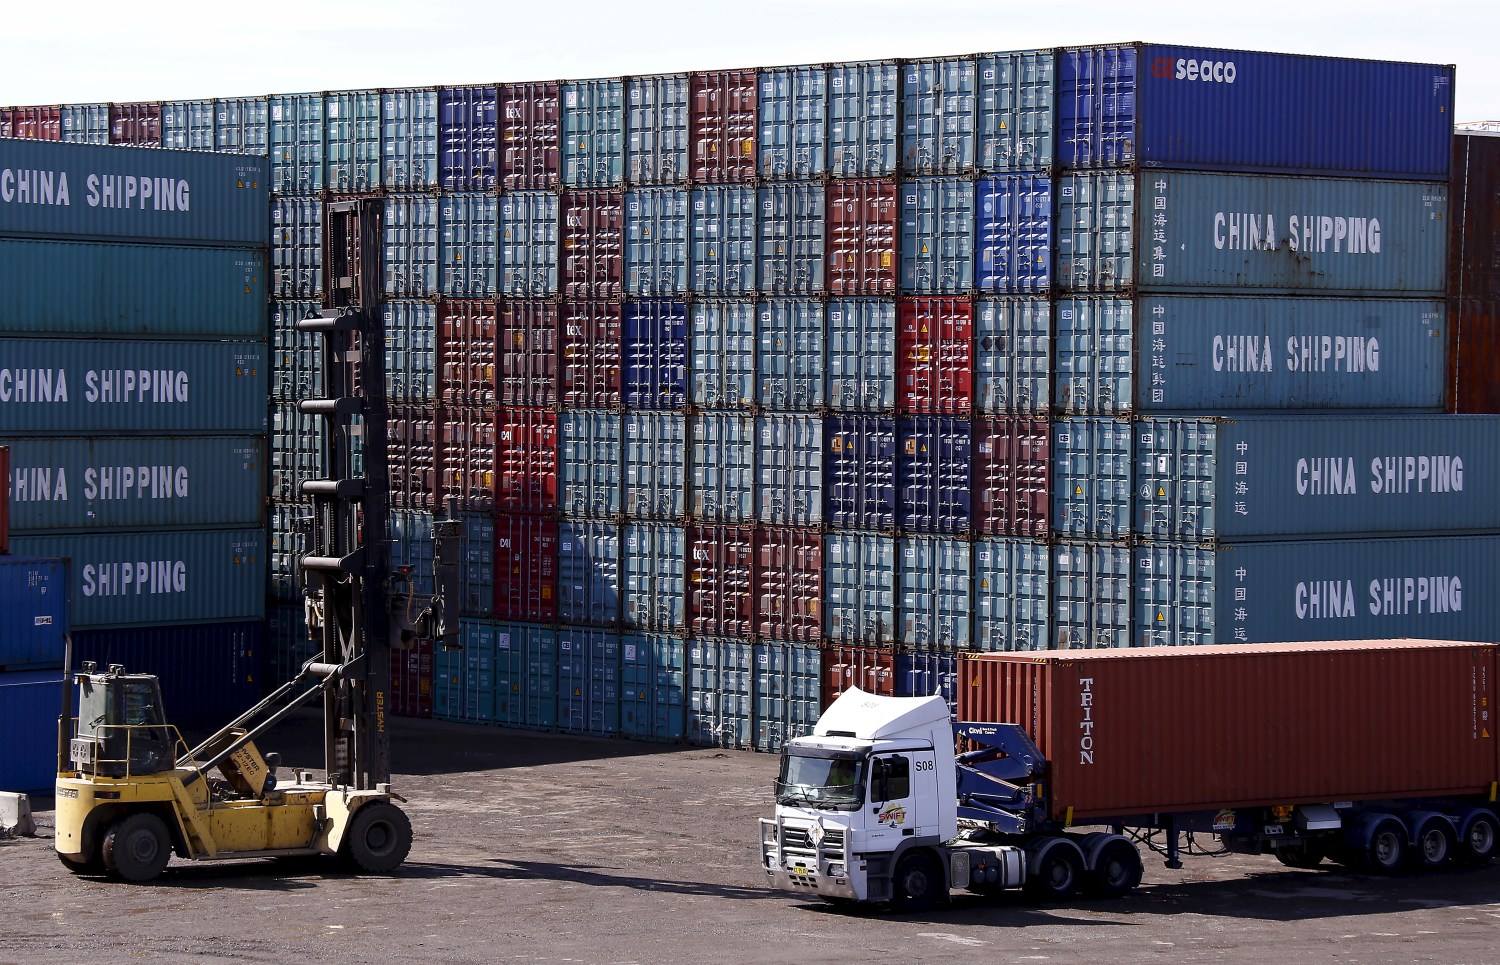 A worker driving a forklift stacks containers in a yard at Port Botany's container handling facility located in Sydney, Australia, March 2, 2016. Picture taken March 2, 2016. REUTERS/David Gray - GF10000371752